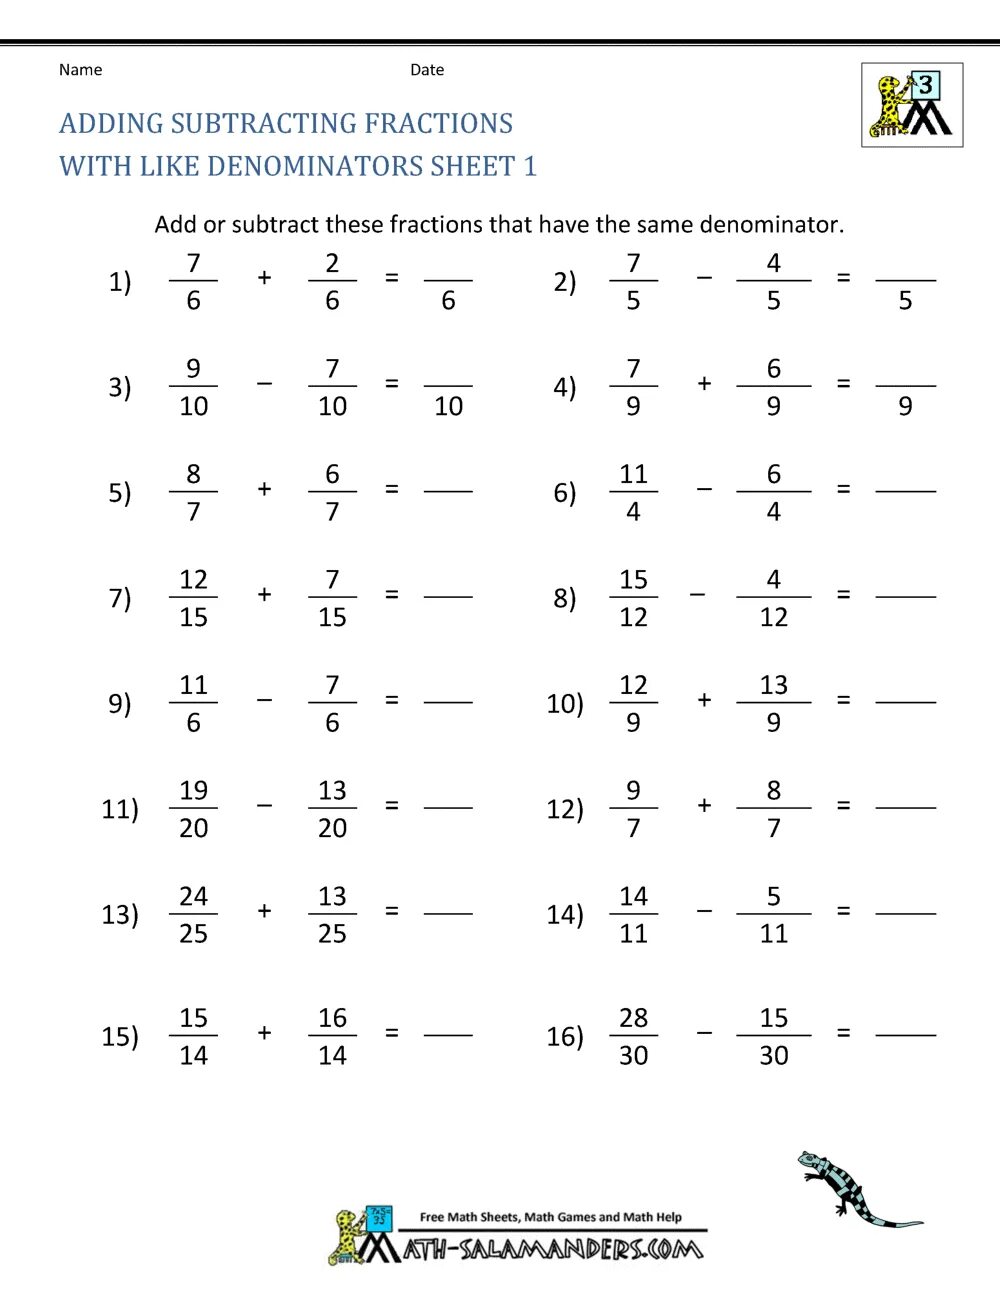 Adding. Adding and Subtracting fractions. Addition and Subtraction of fractions. Adding and Subtracting fractions like denominators. Adding and Subtracting fractions Worksheet.